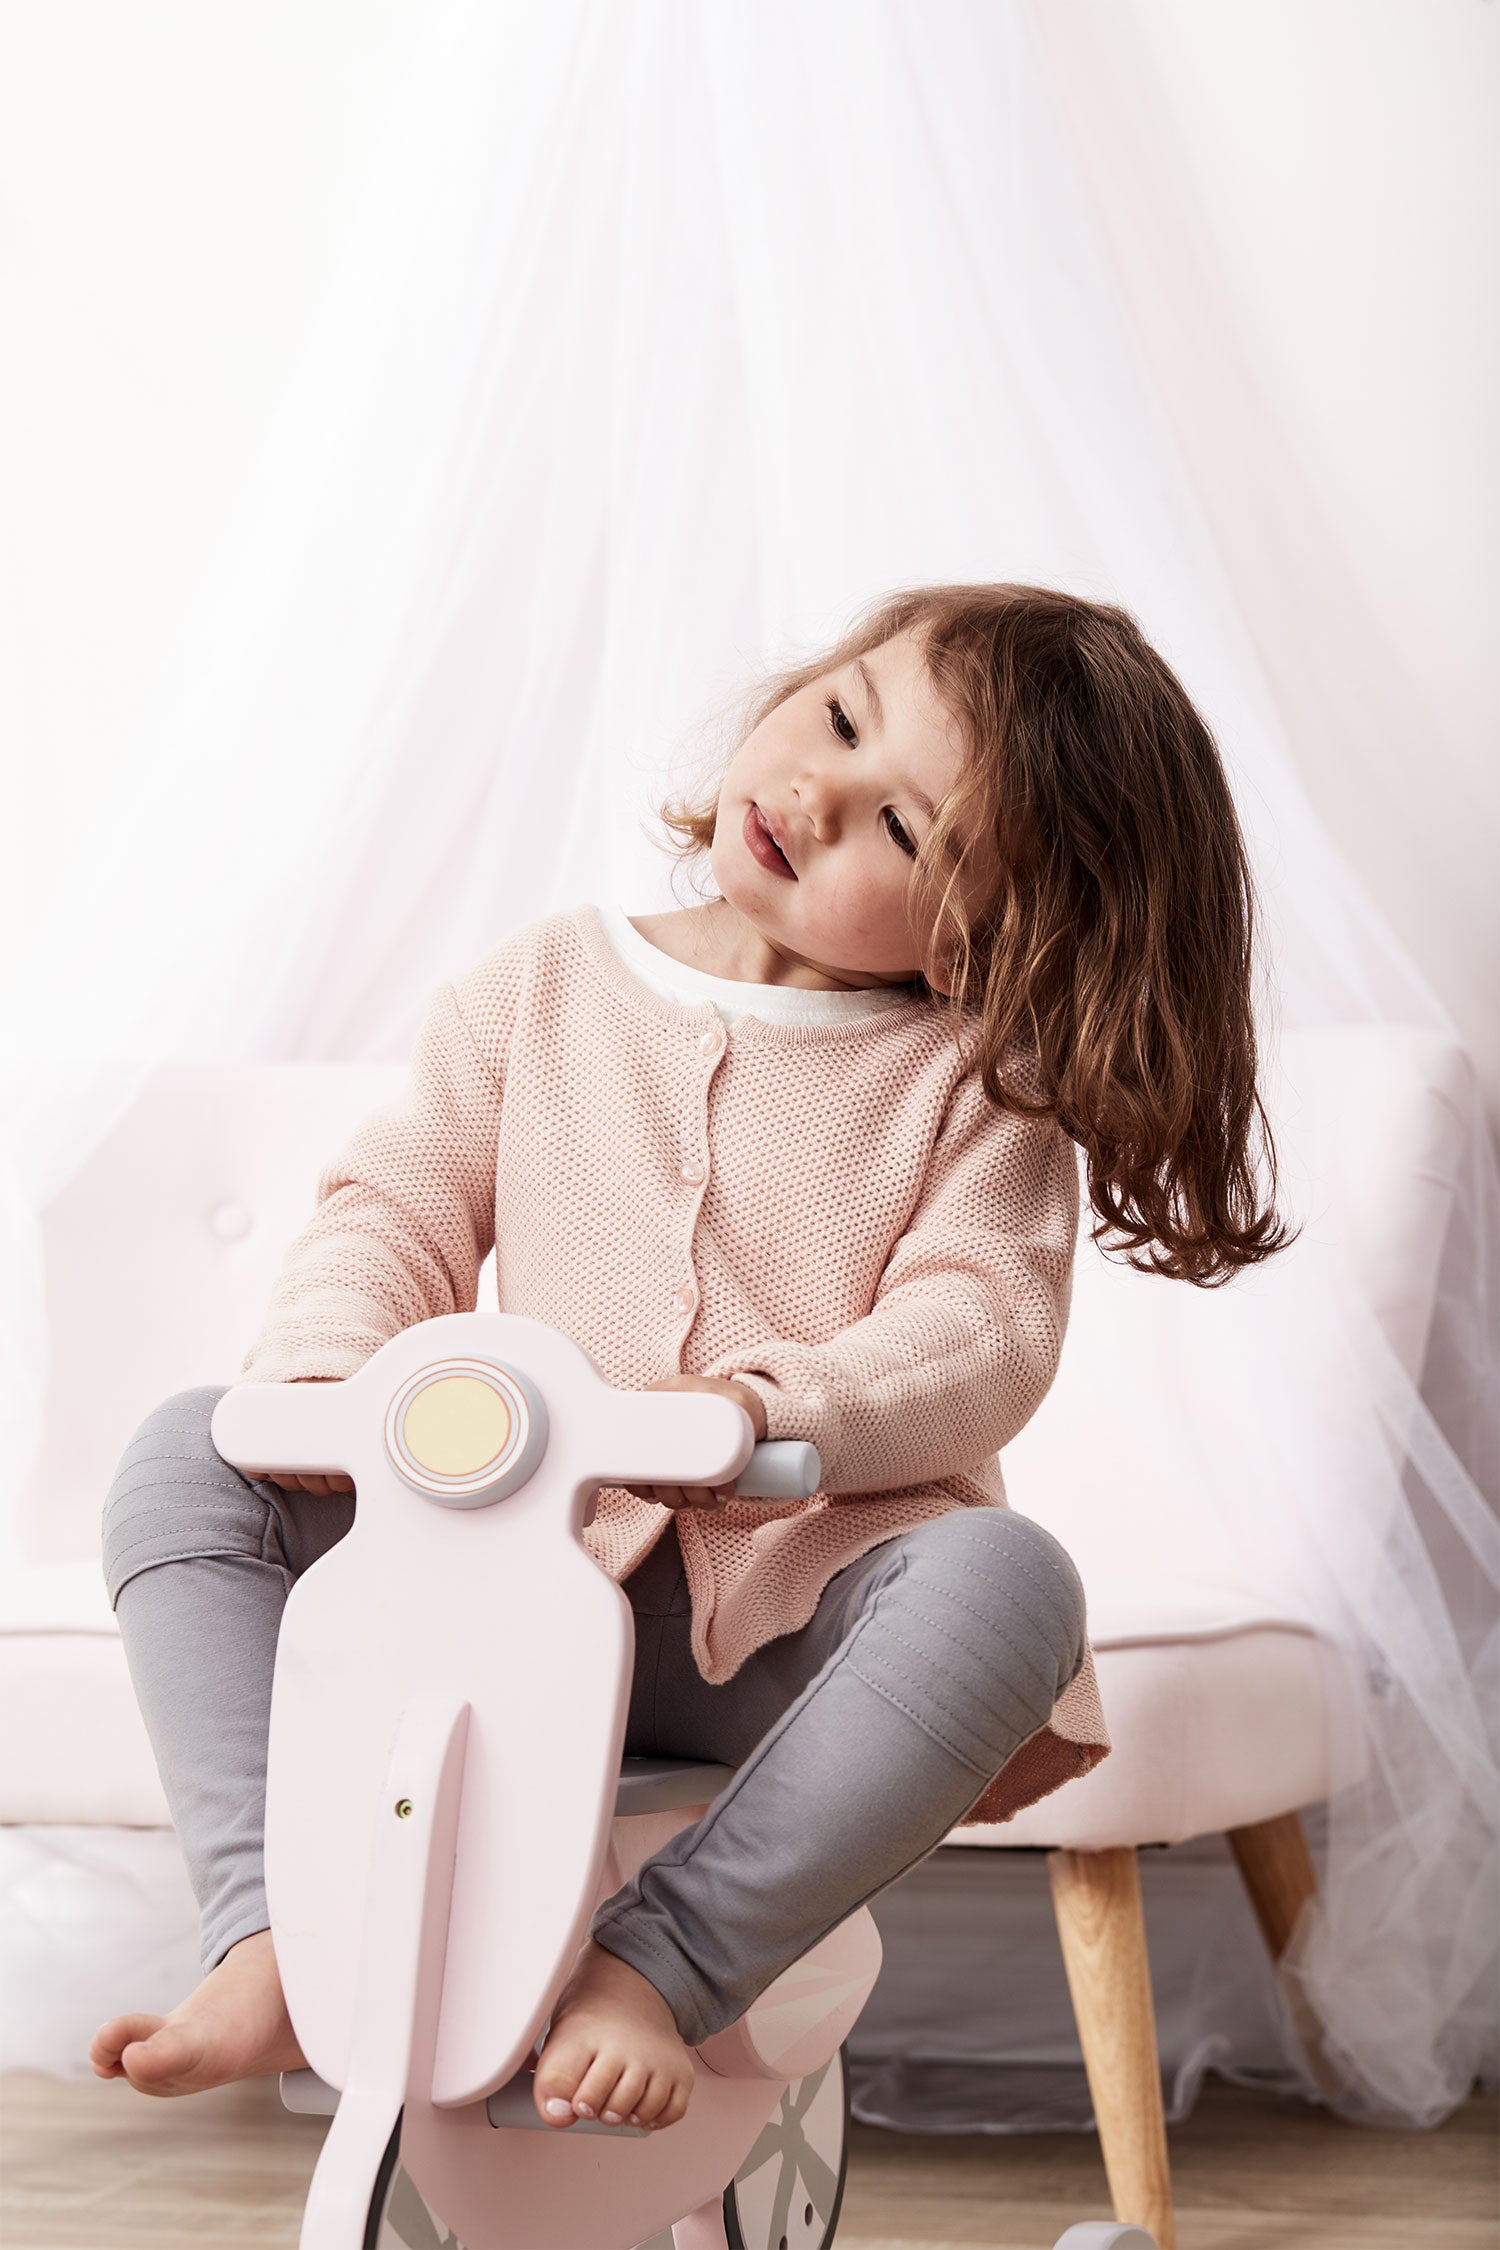 Kid’s Concept Rocking Scooter – Pink